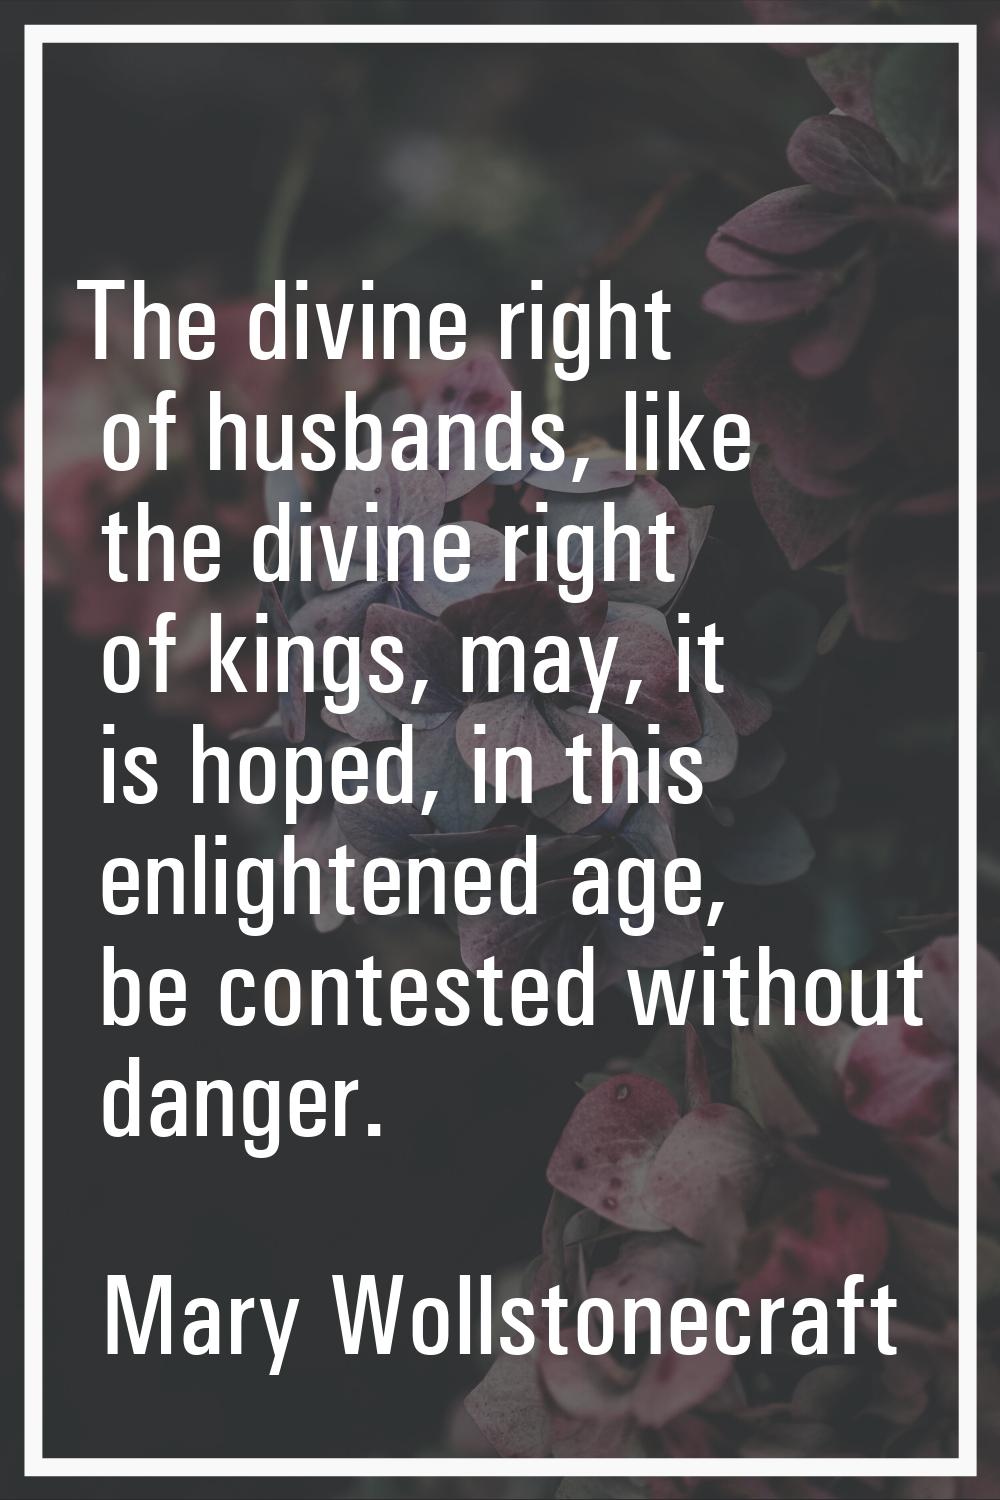 The divine right of husbands, like the divine right of kings, may, it is hoped, in this enlightened